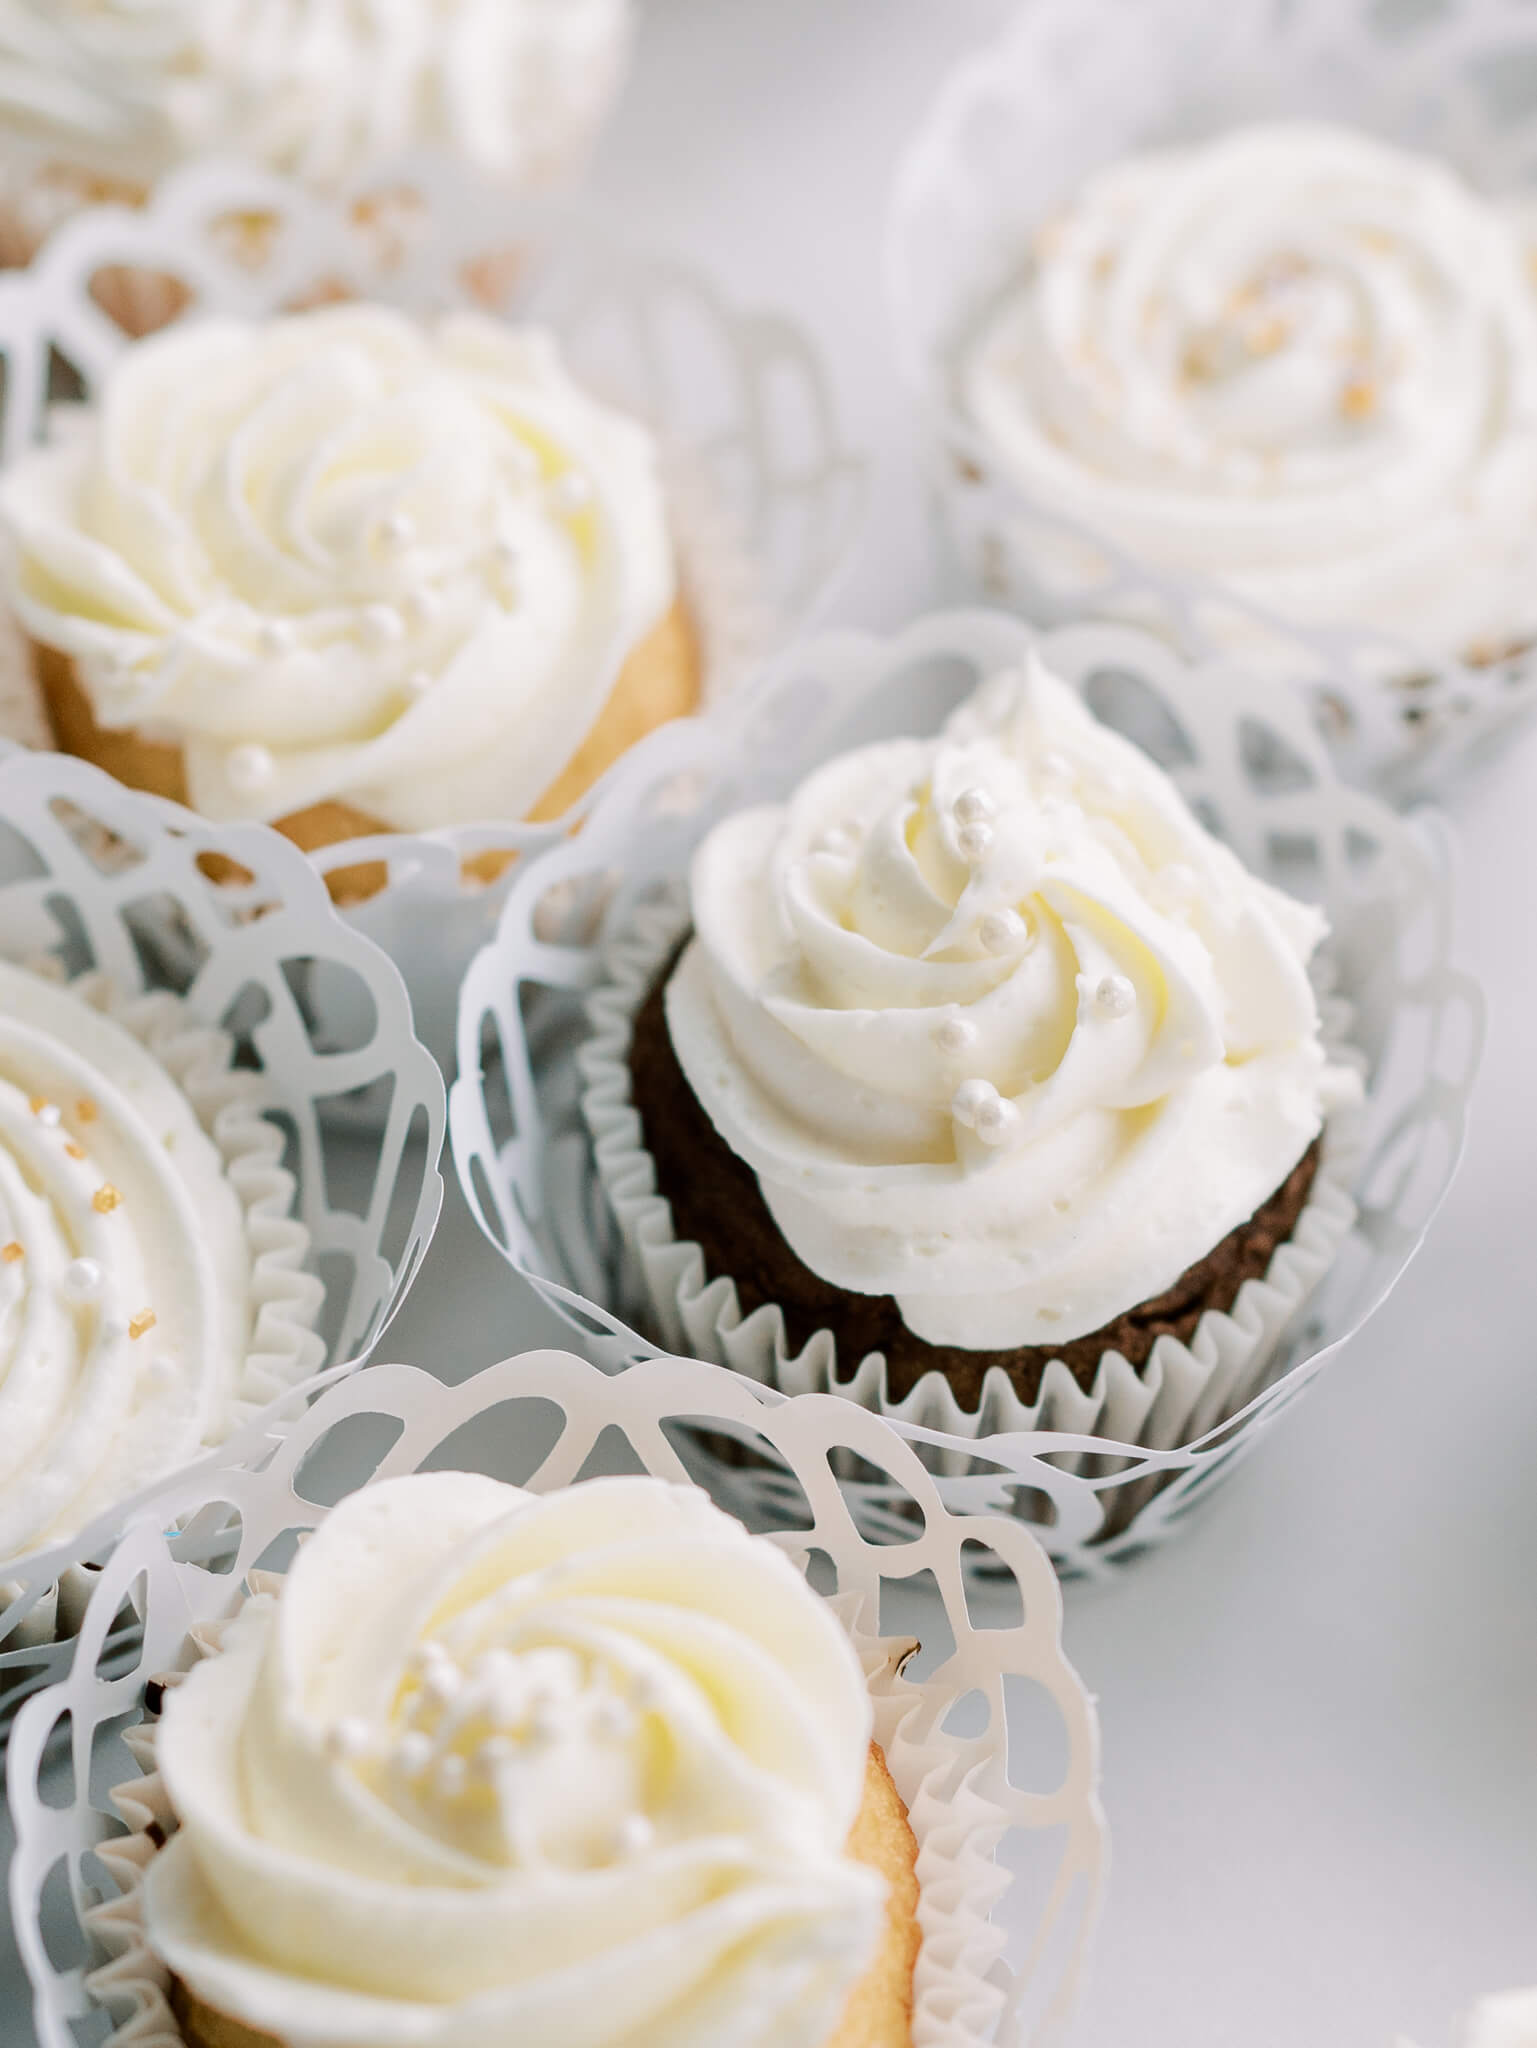 Close-up of chocolate and vanilla cupcakes with white icing in lace paper.